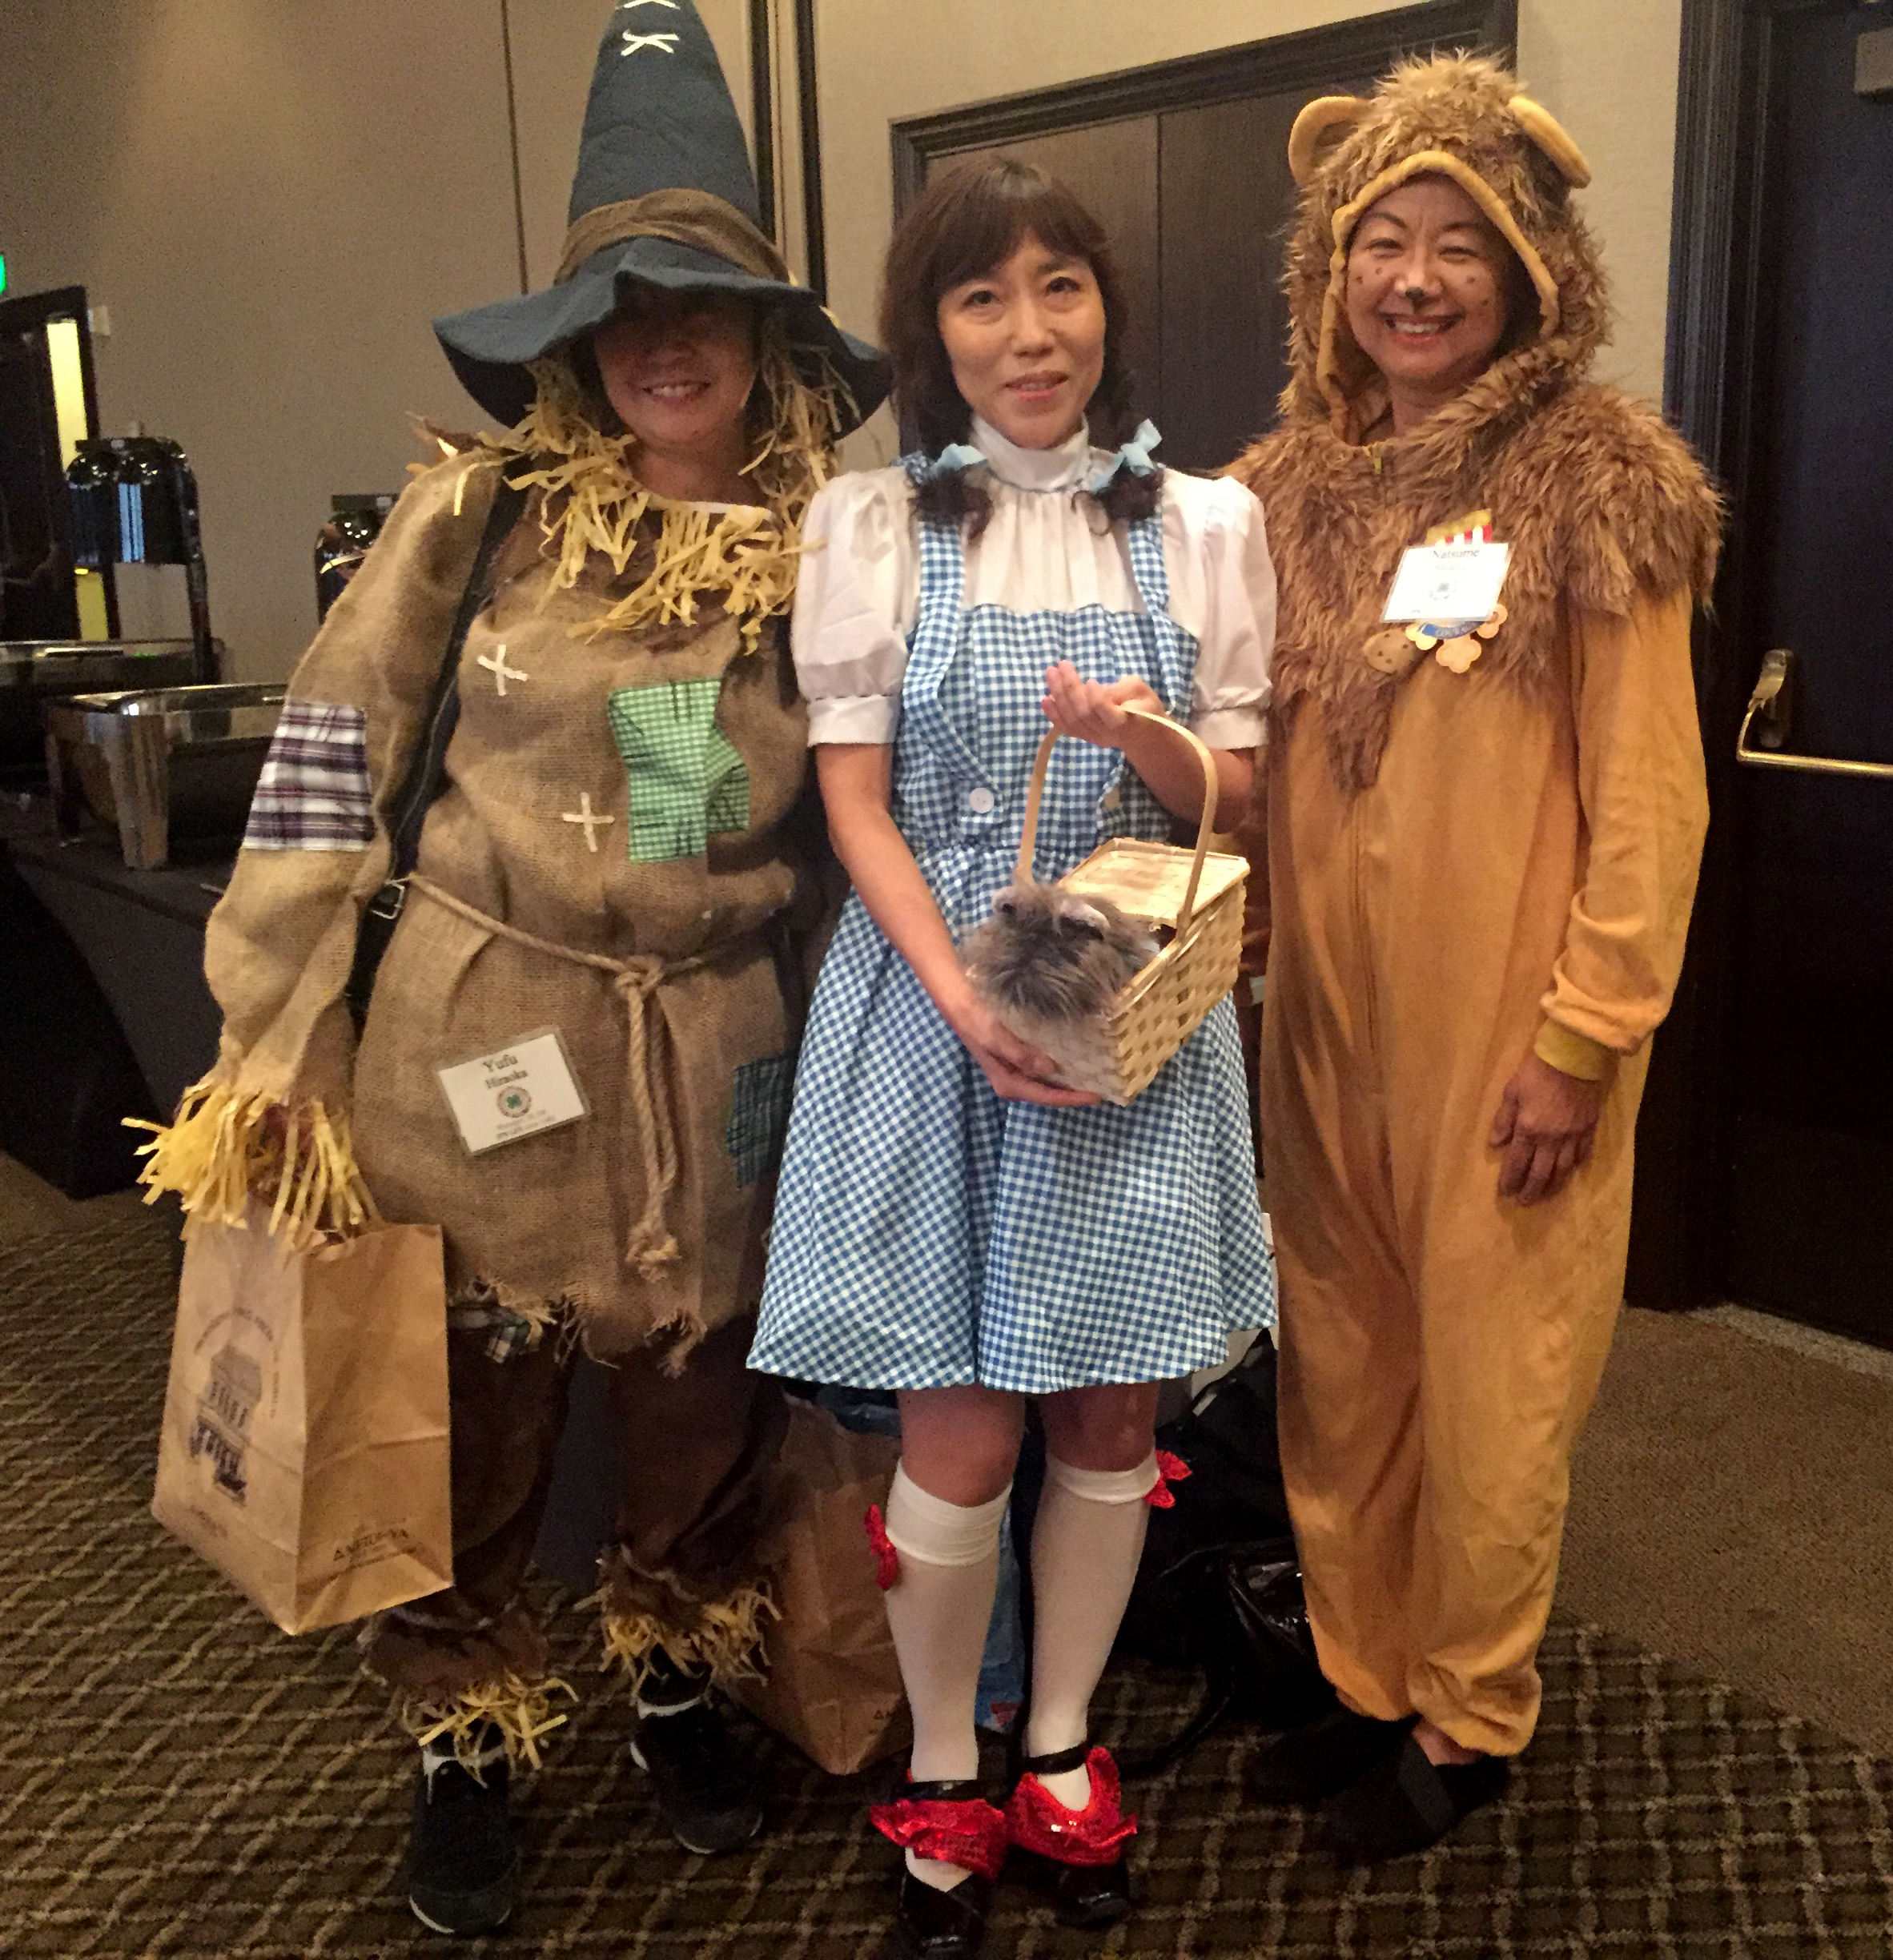 Japanese partners dressed in costumes